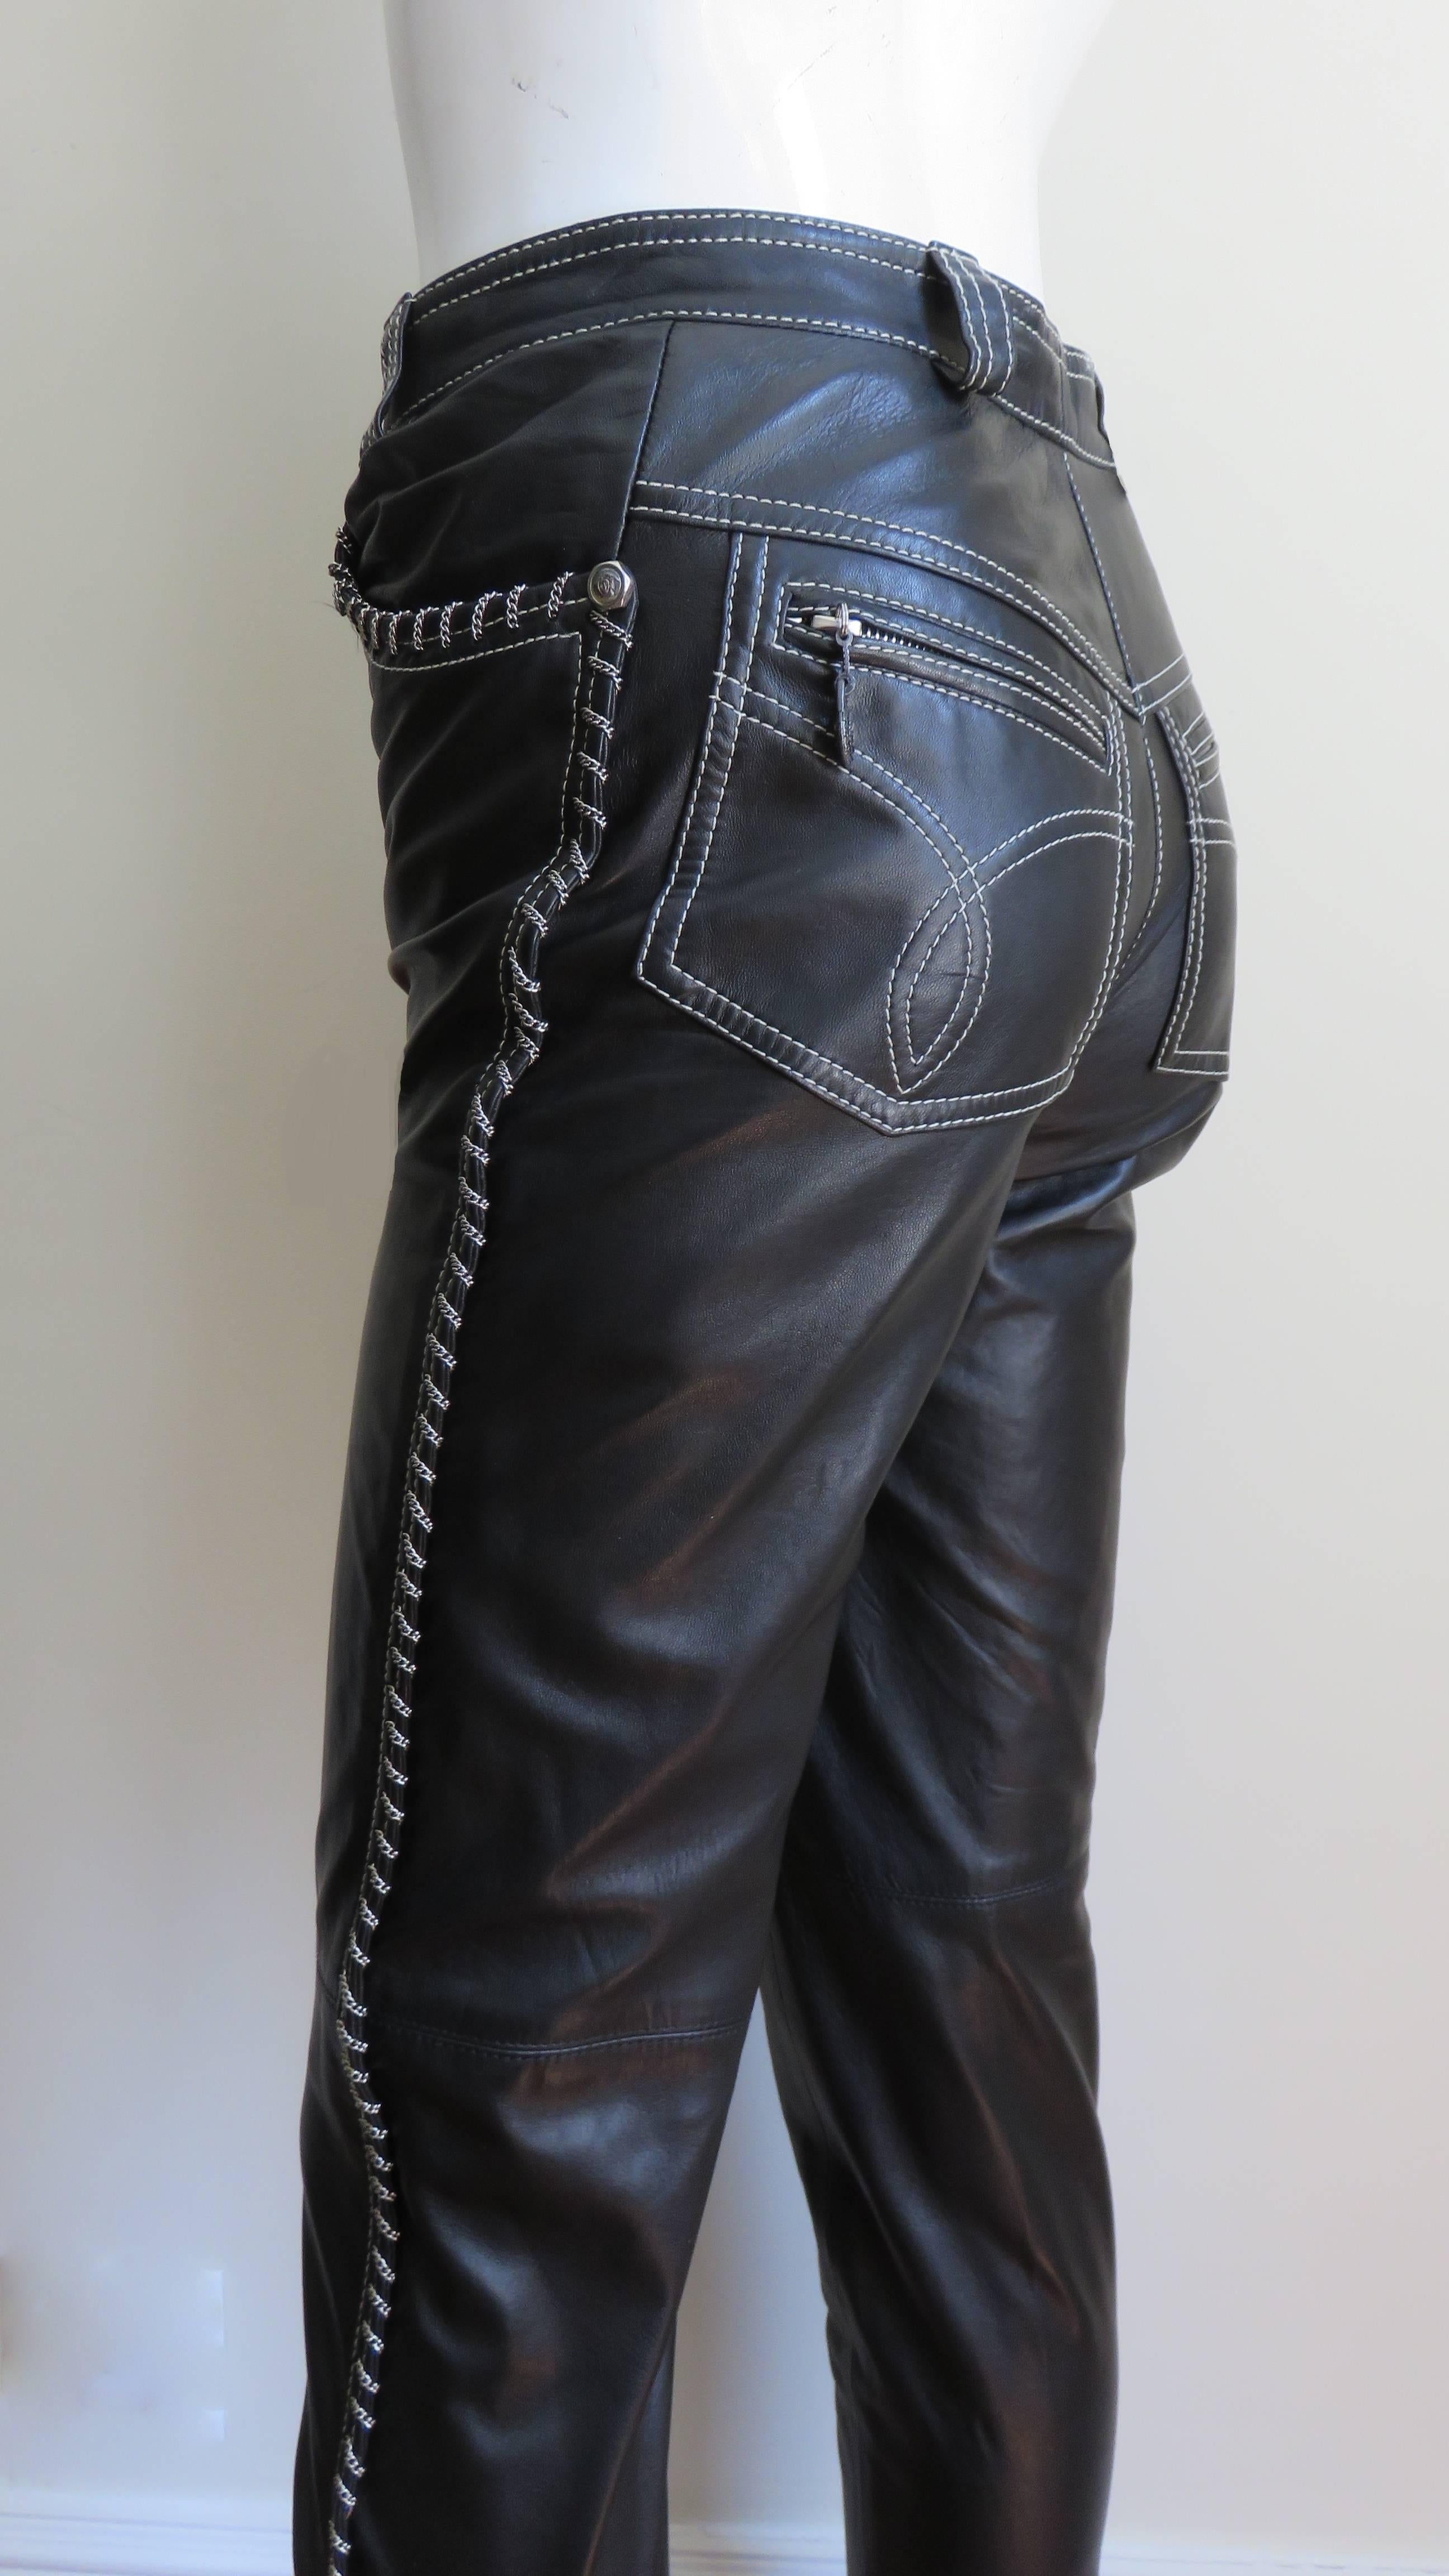  Gianni Versace A/W 1992 Leather Motorcycle Jacket and Pants With Chain Trim  For Sale 10